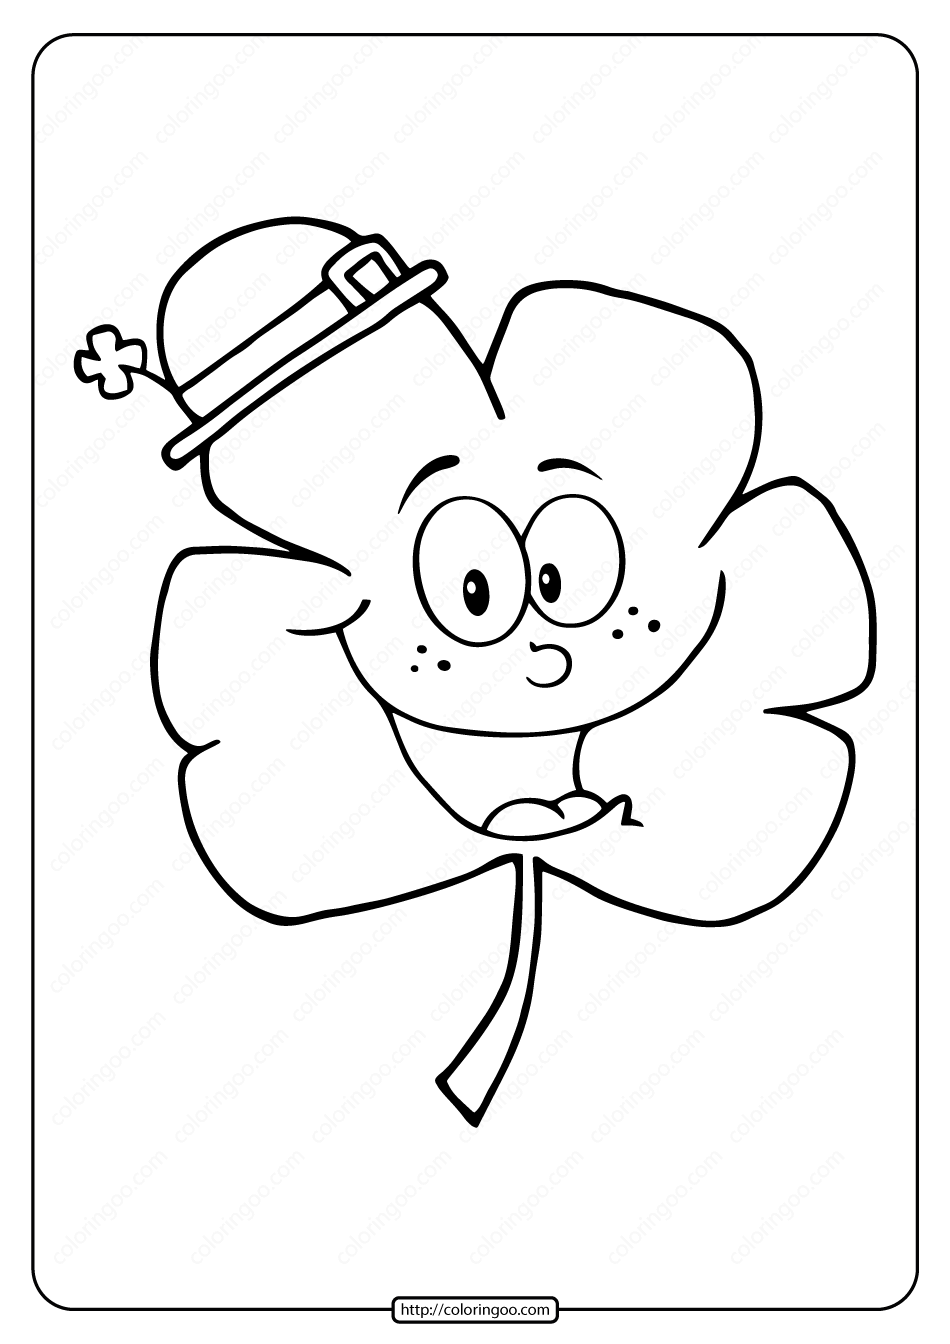 free printable smiling clover pdf coloring page